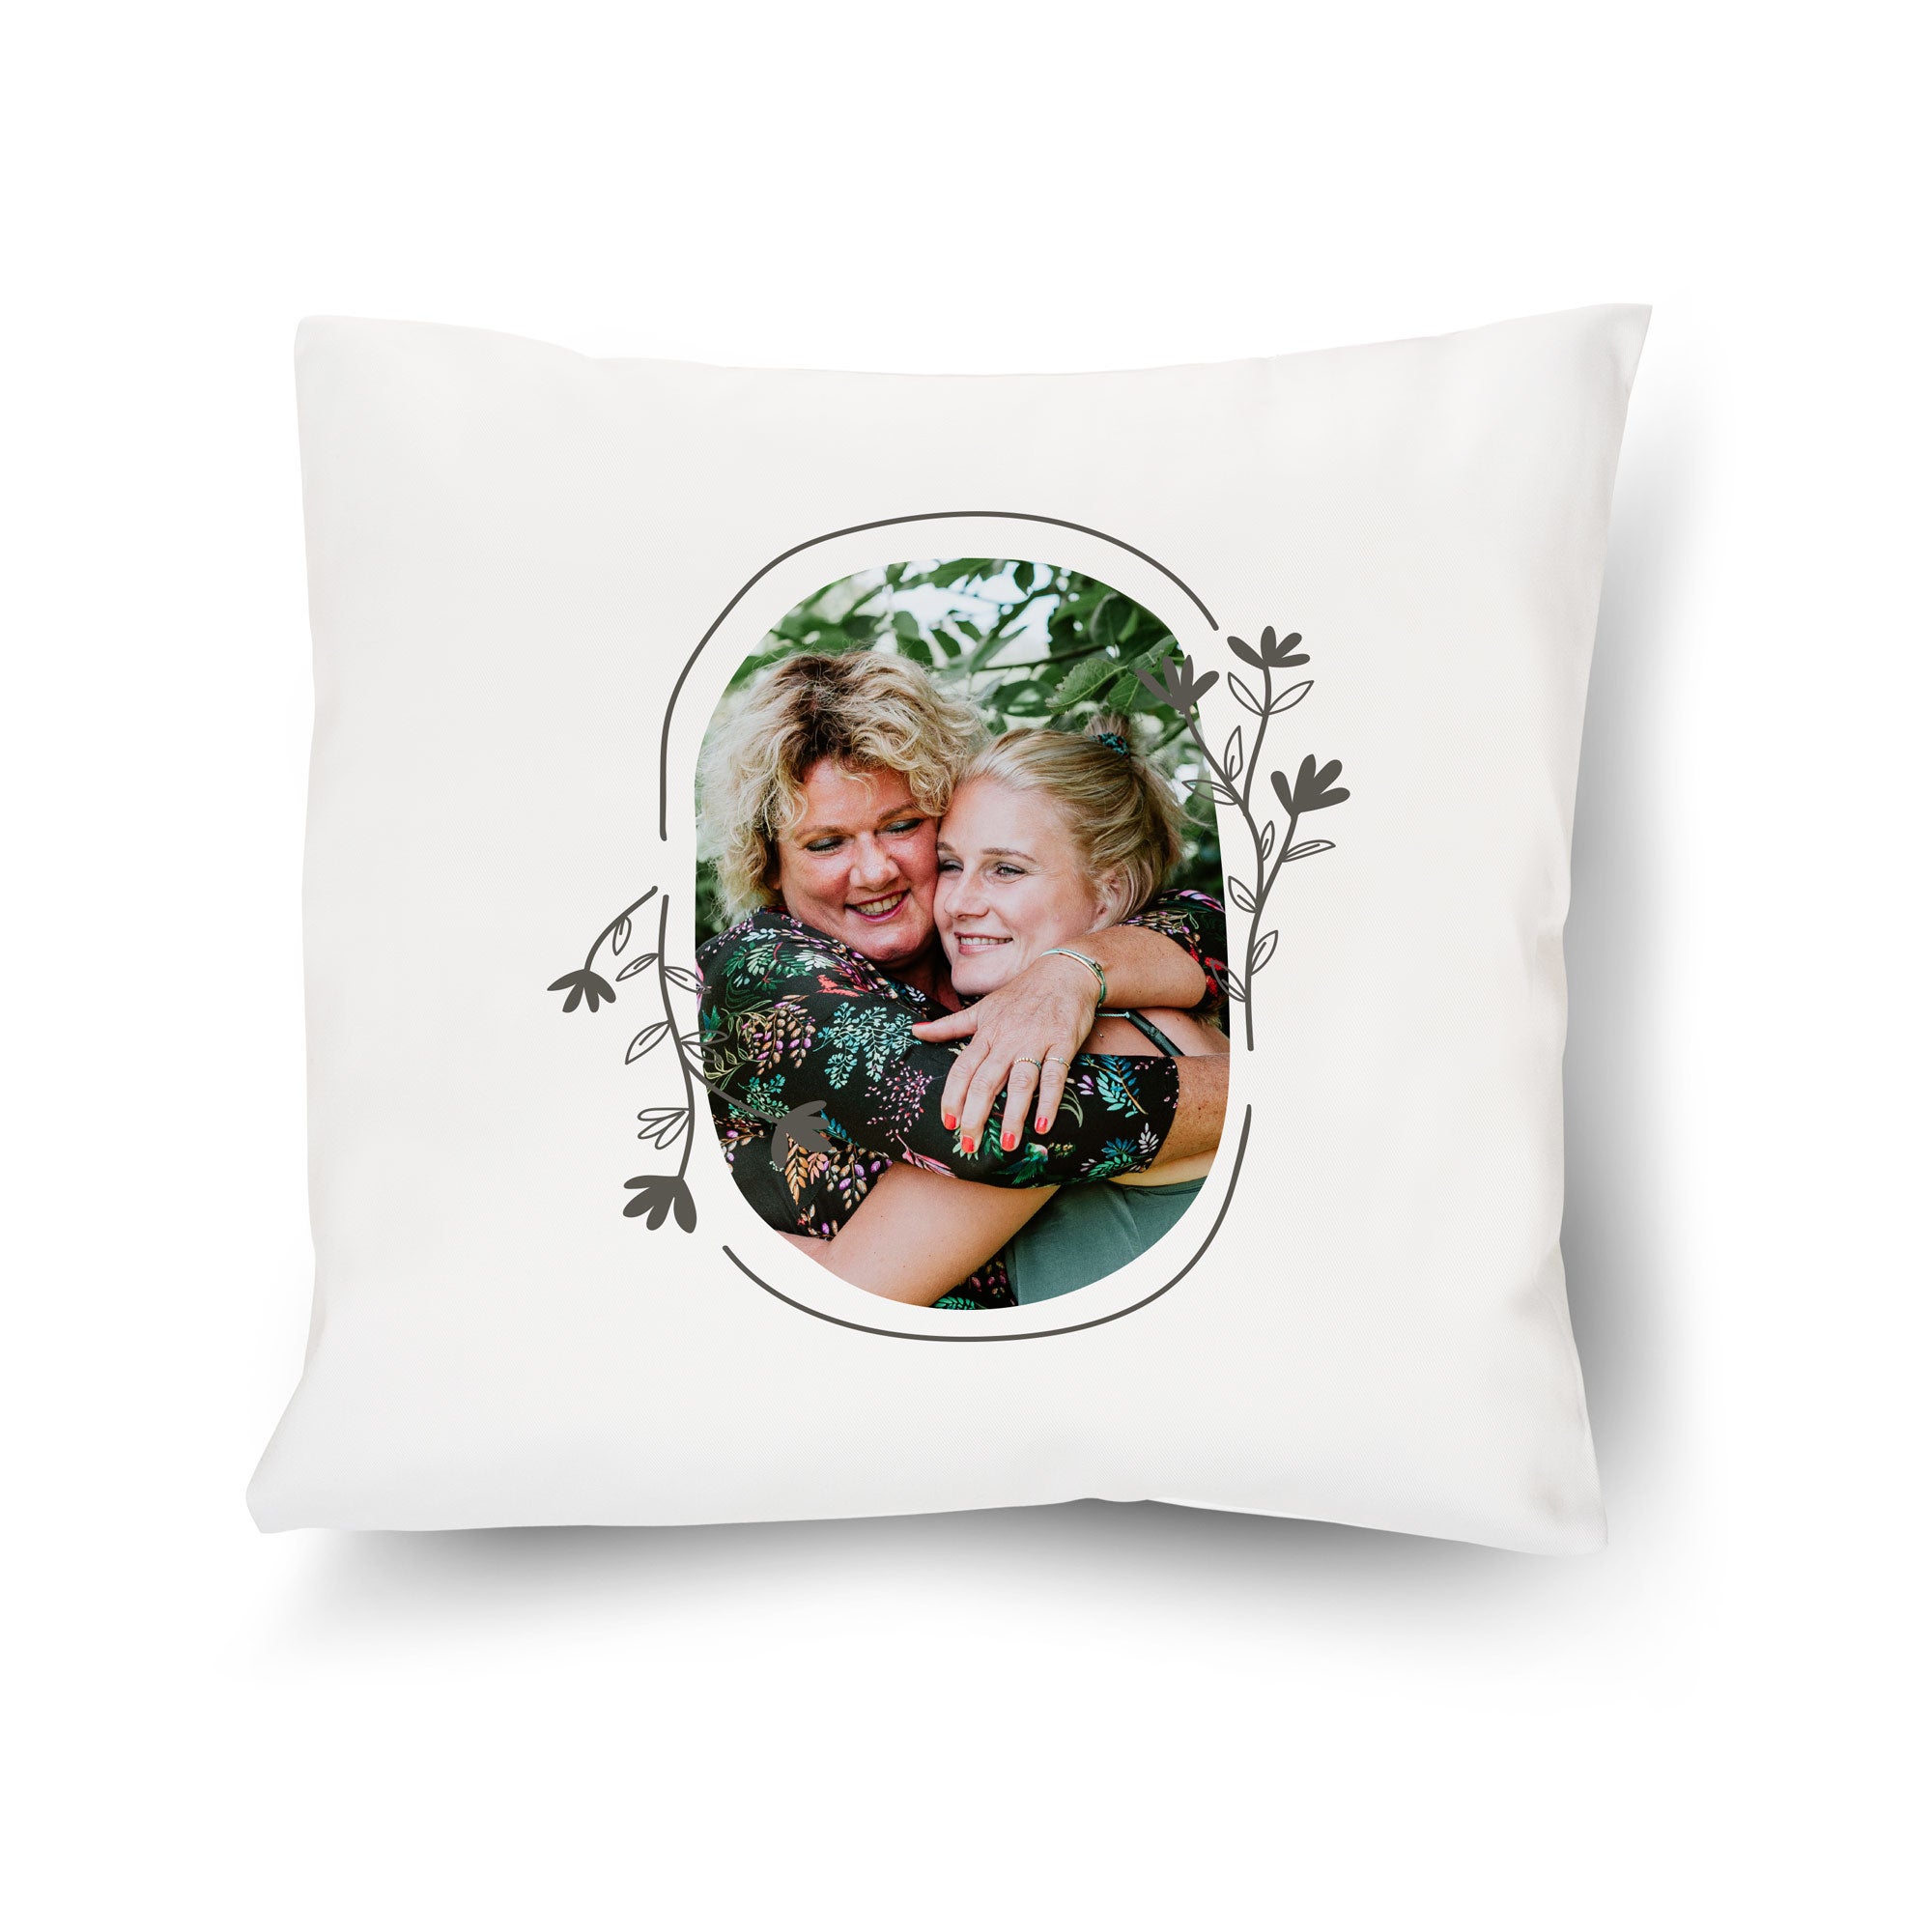 Mother's Day Pillow